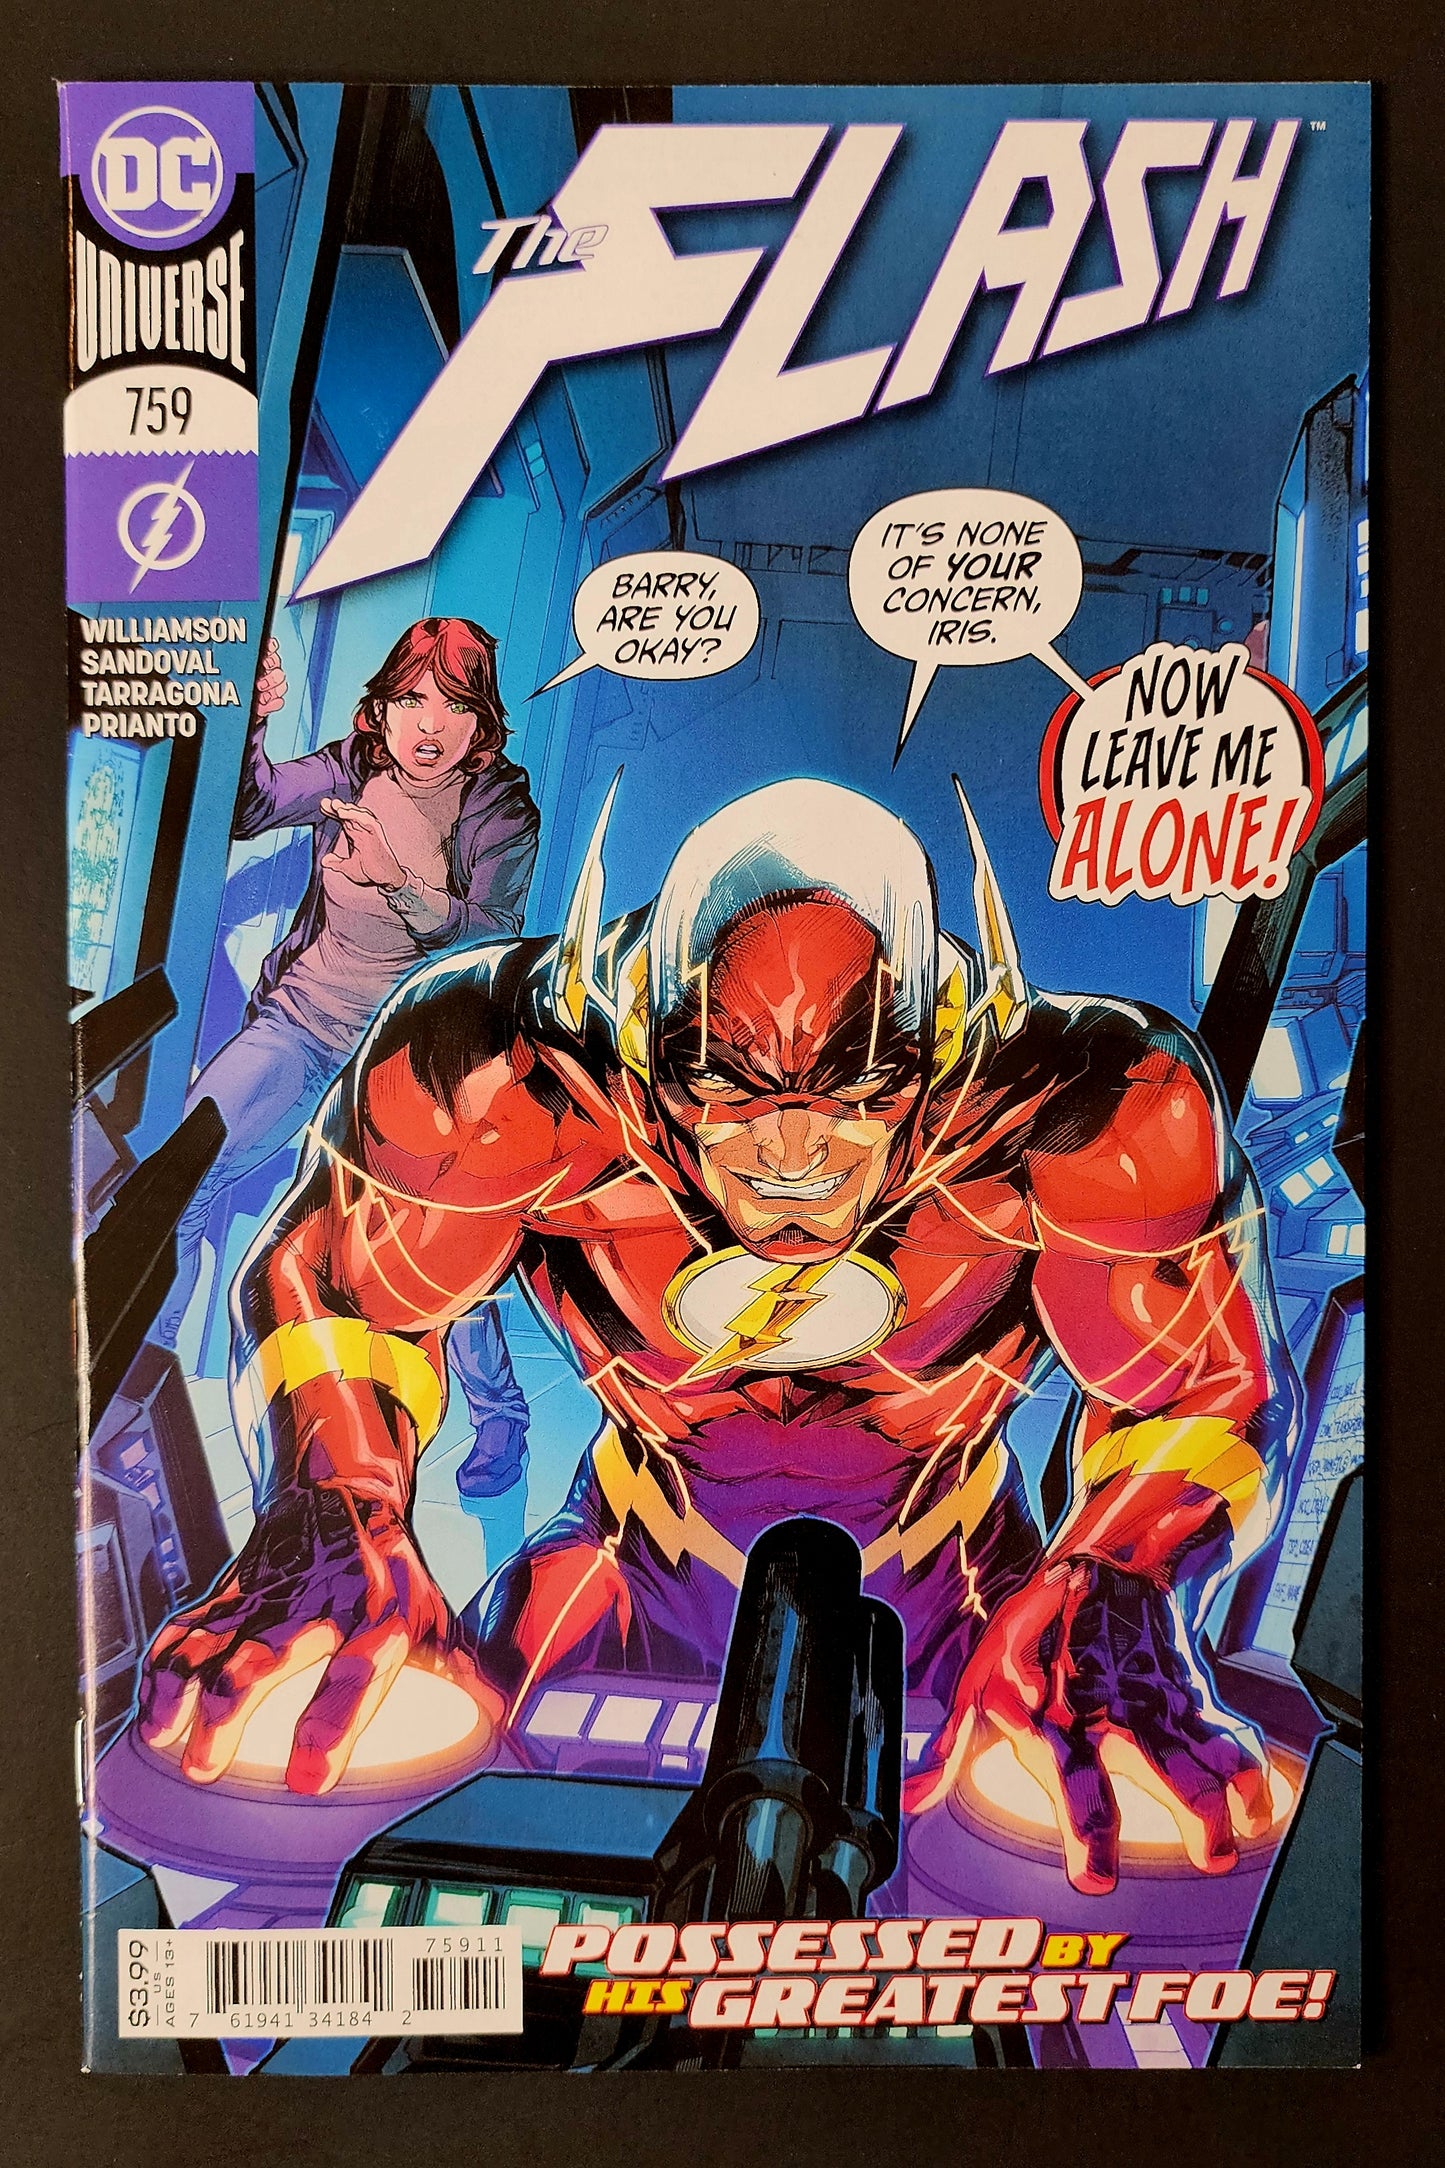 The Flash #759 (FN/VF)